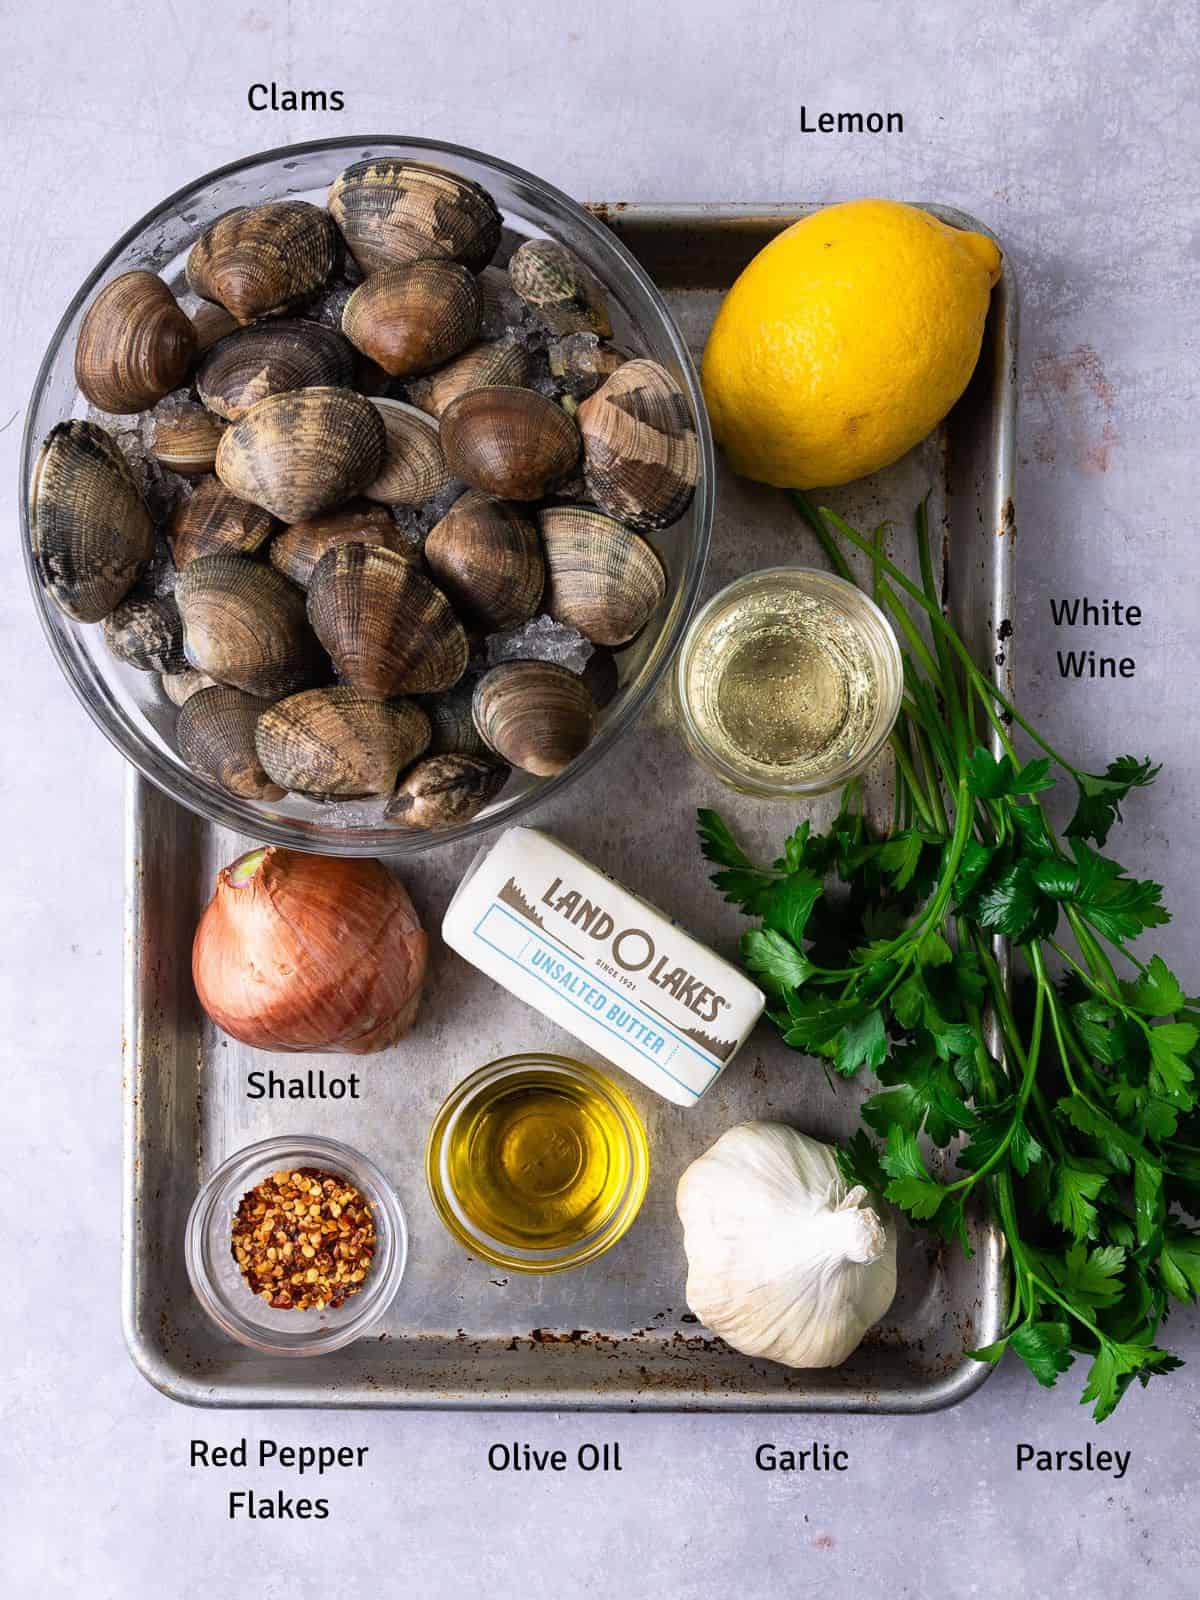 Ingredients for steamed clams in white wine, including shallot, garlic and butter.